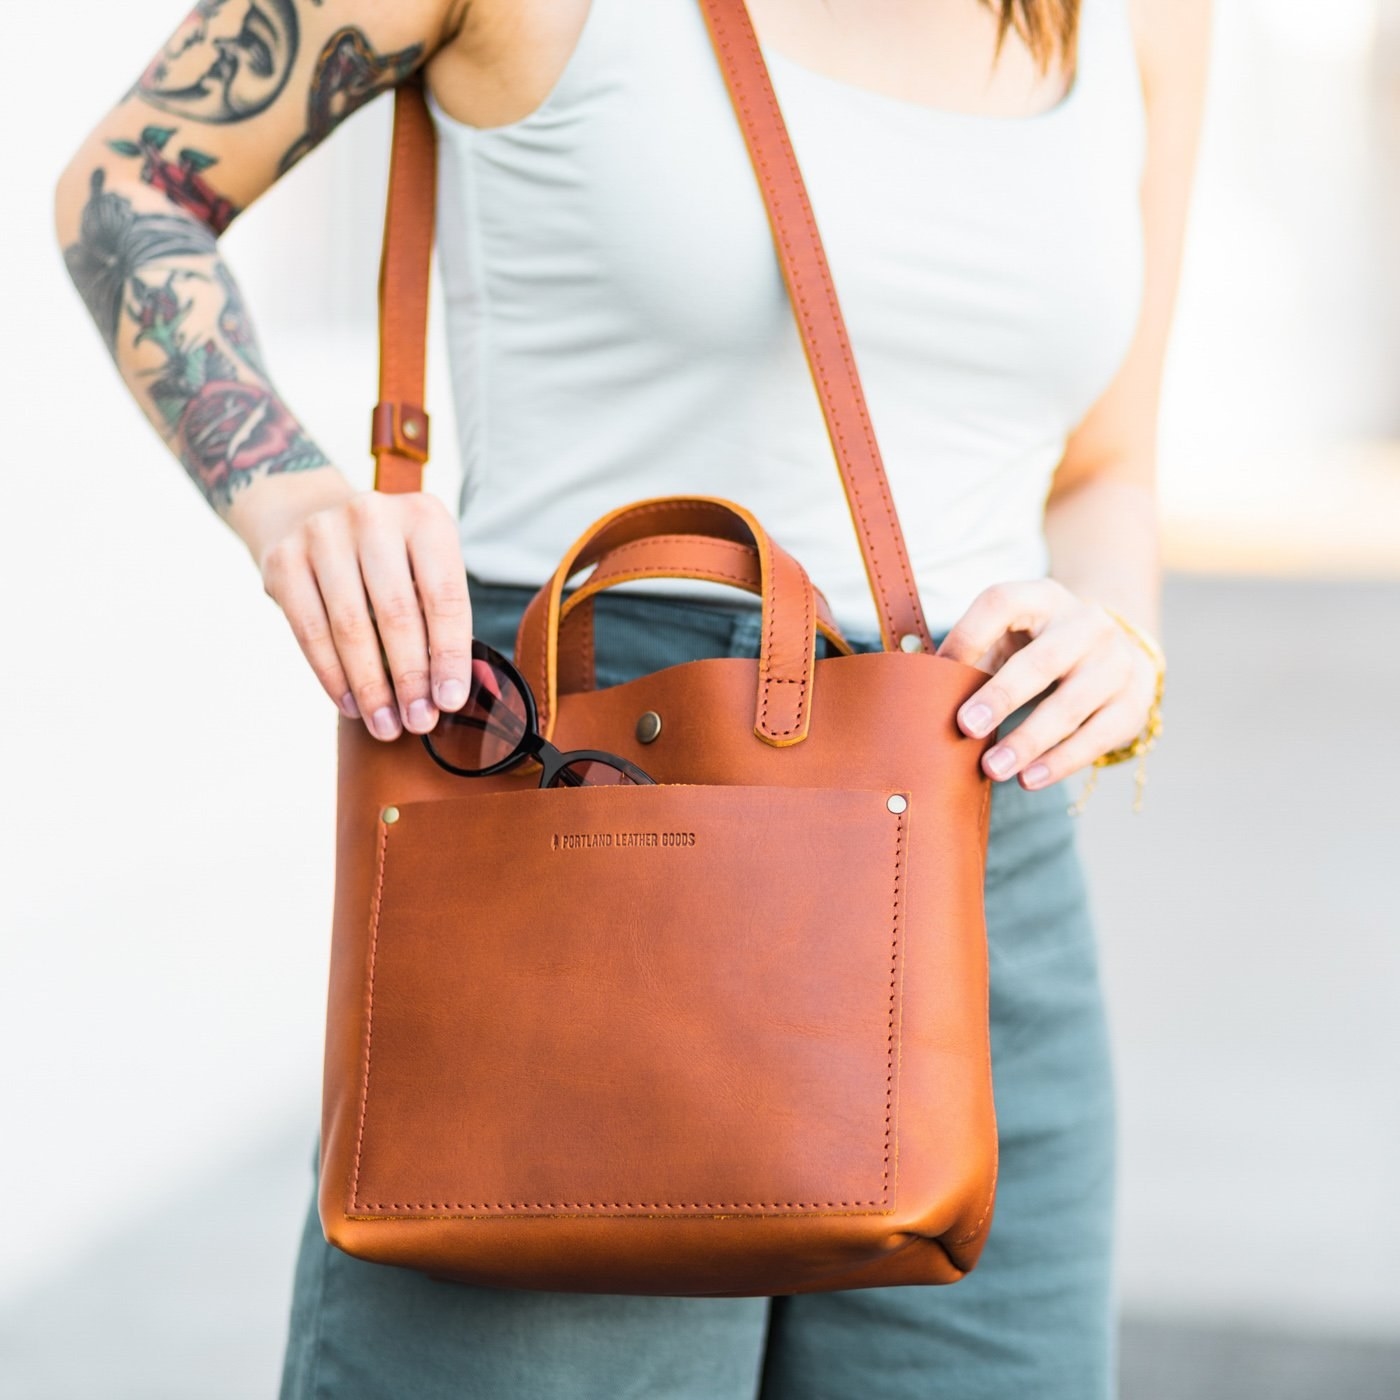 Model is taking black glasses out of a burnt orange-colored leather crossbody bag